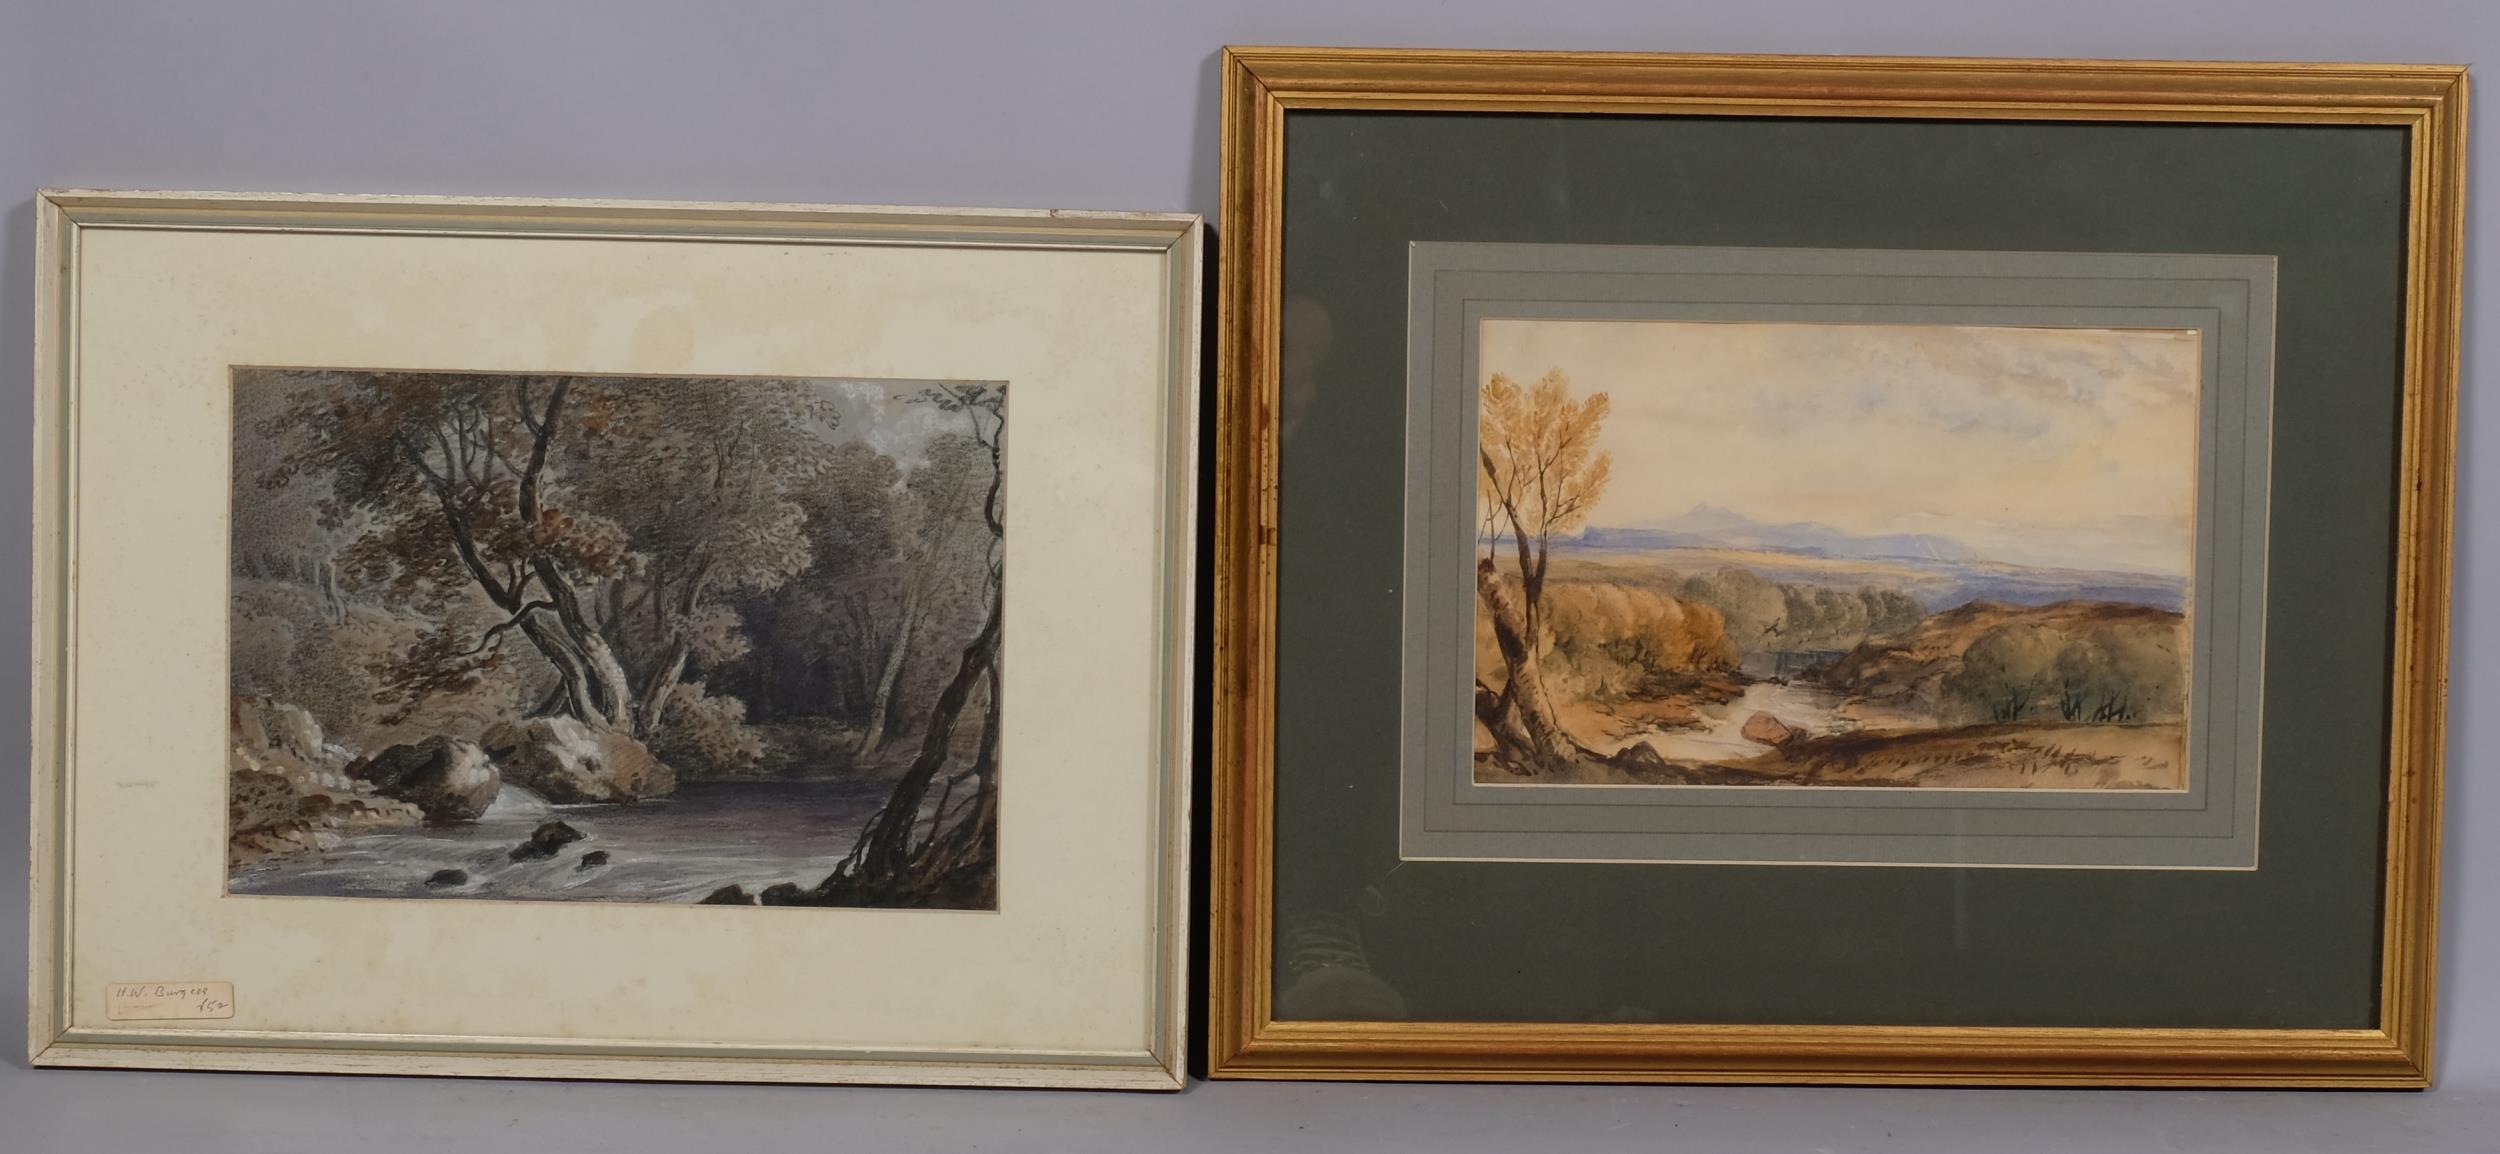 5 various 19th century watercolours, including Adolphe Ragon, R P Leitch, E Becker, and G R - Image 3 of 4